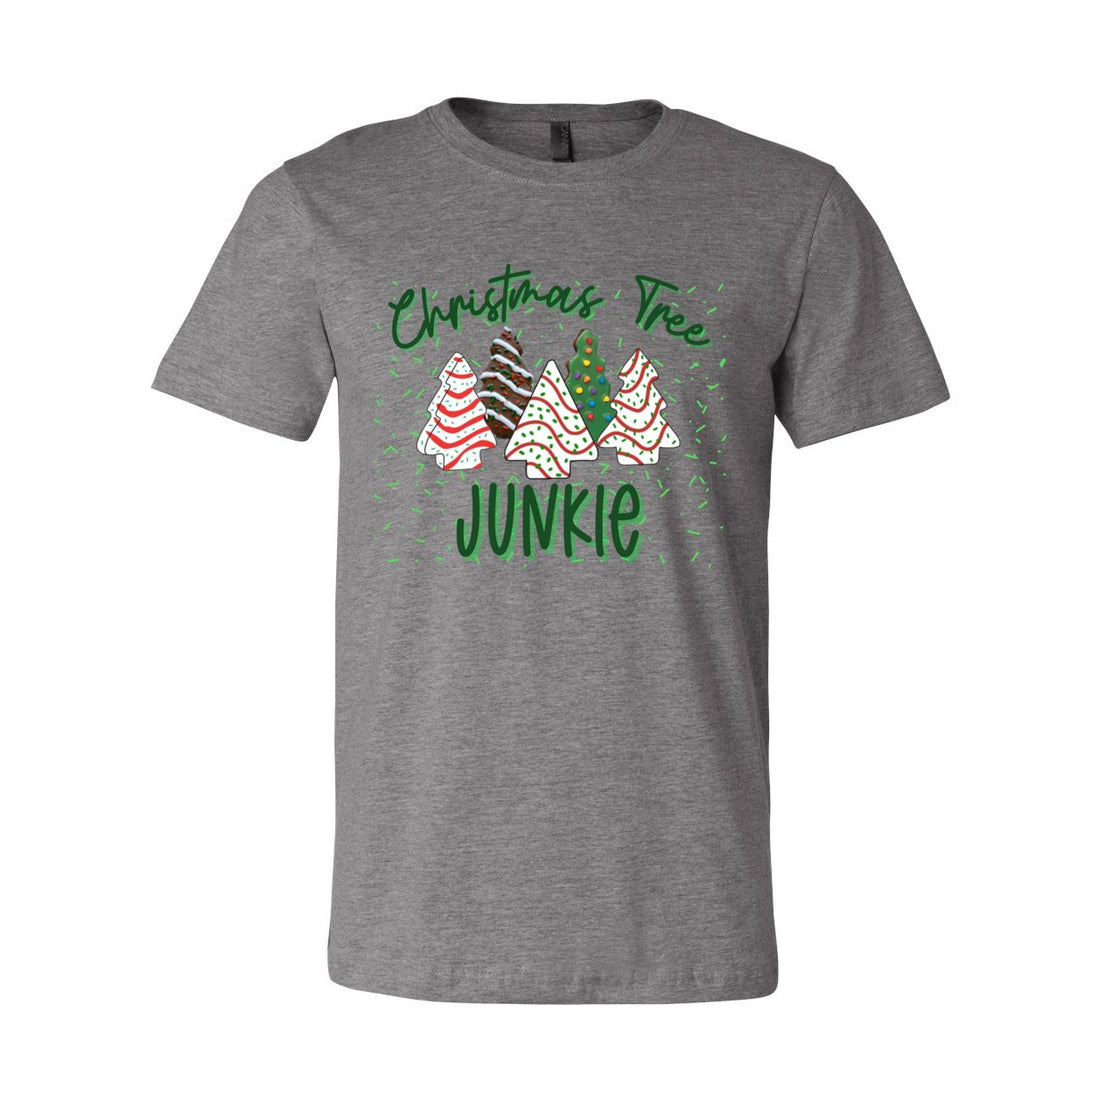 Christmas Tree Junkie - T-Shirts - Positively Sassy - Christmas Tree Junkie